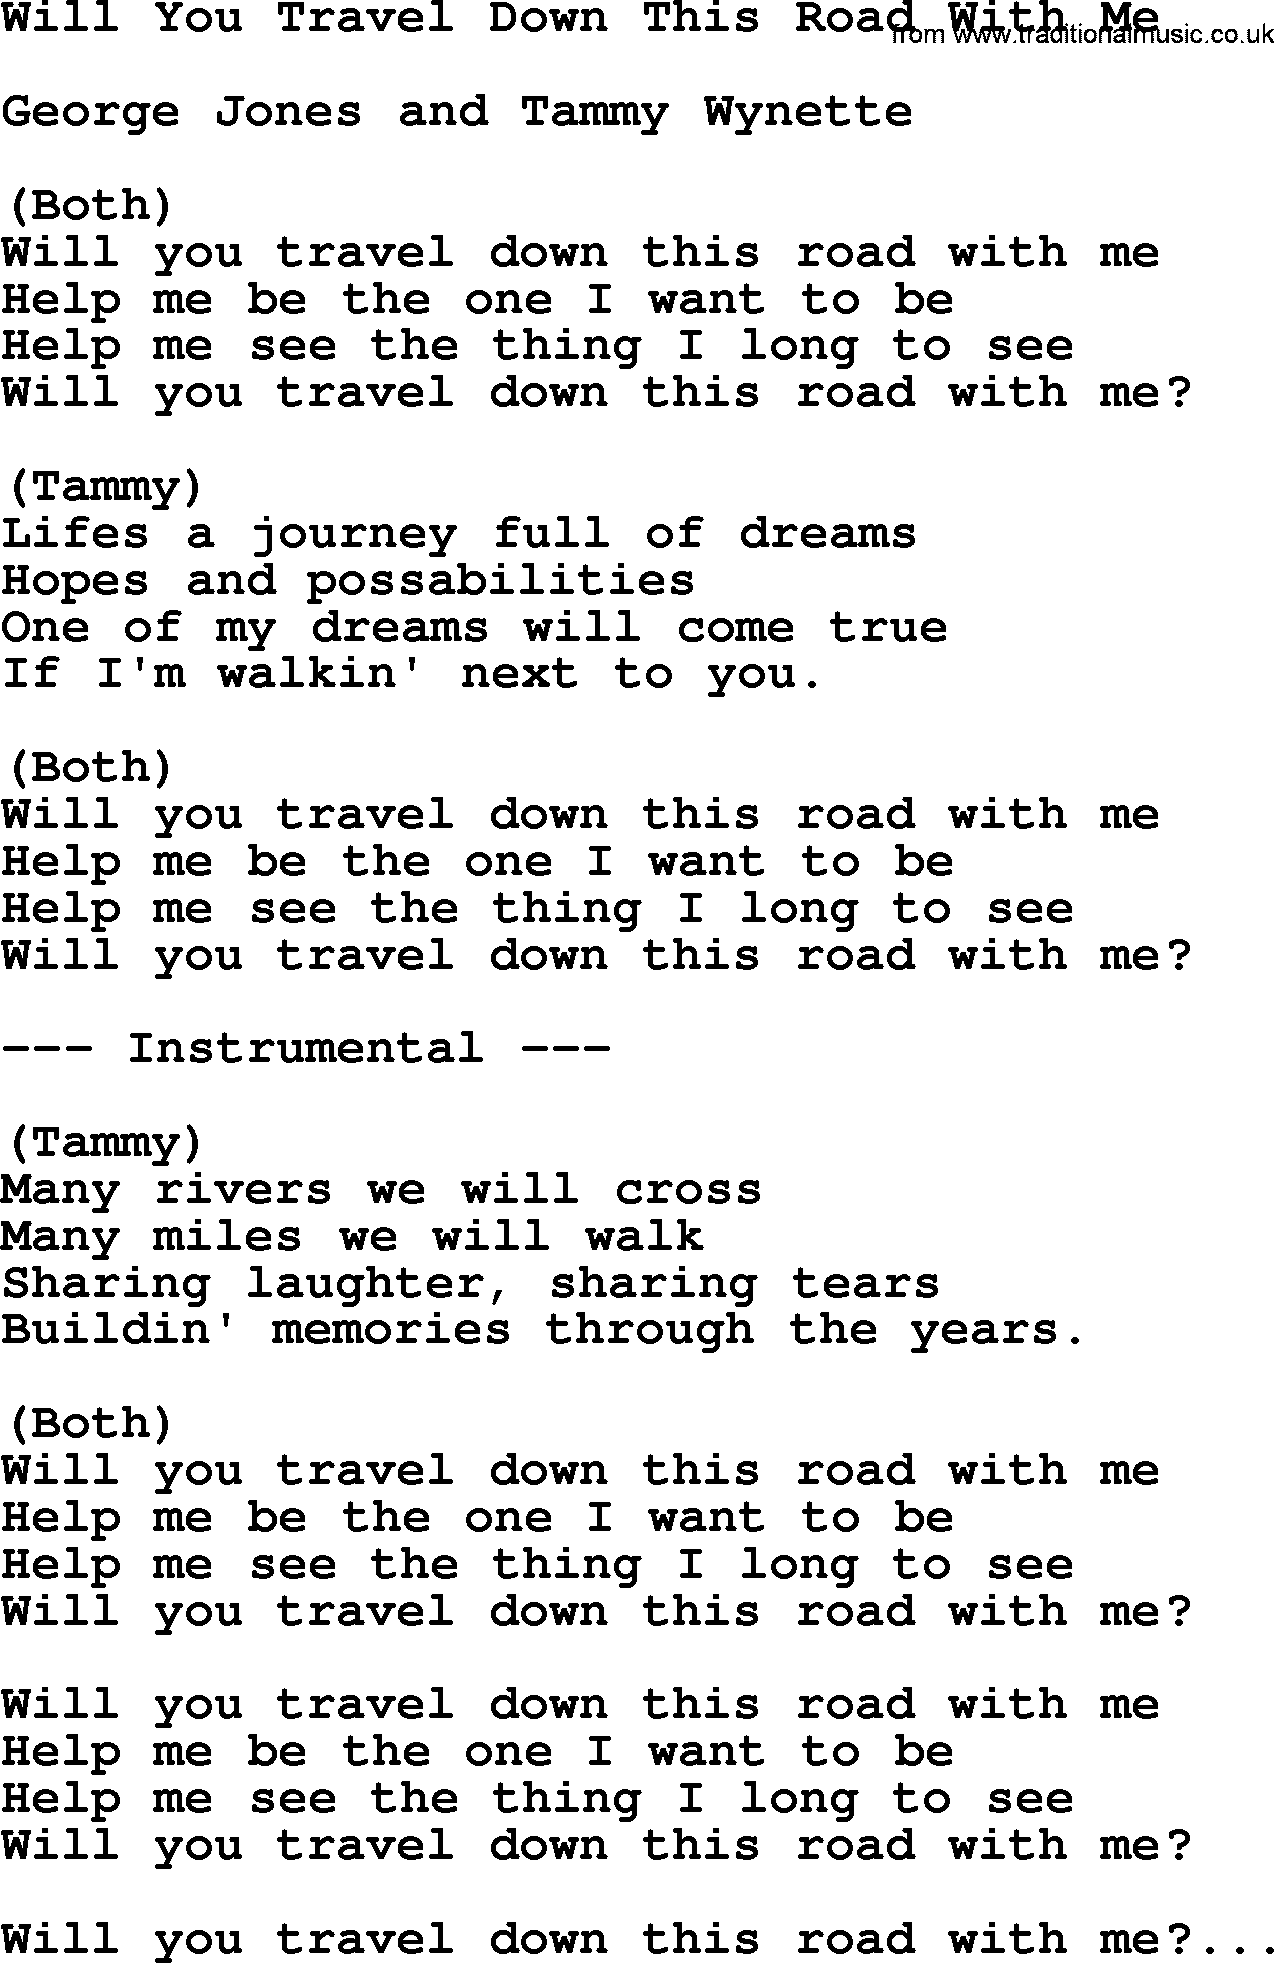 George Jones song: Will You Travel Down This Road With Me, lyrics